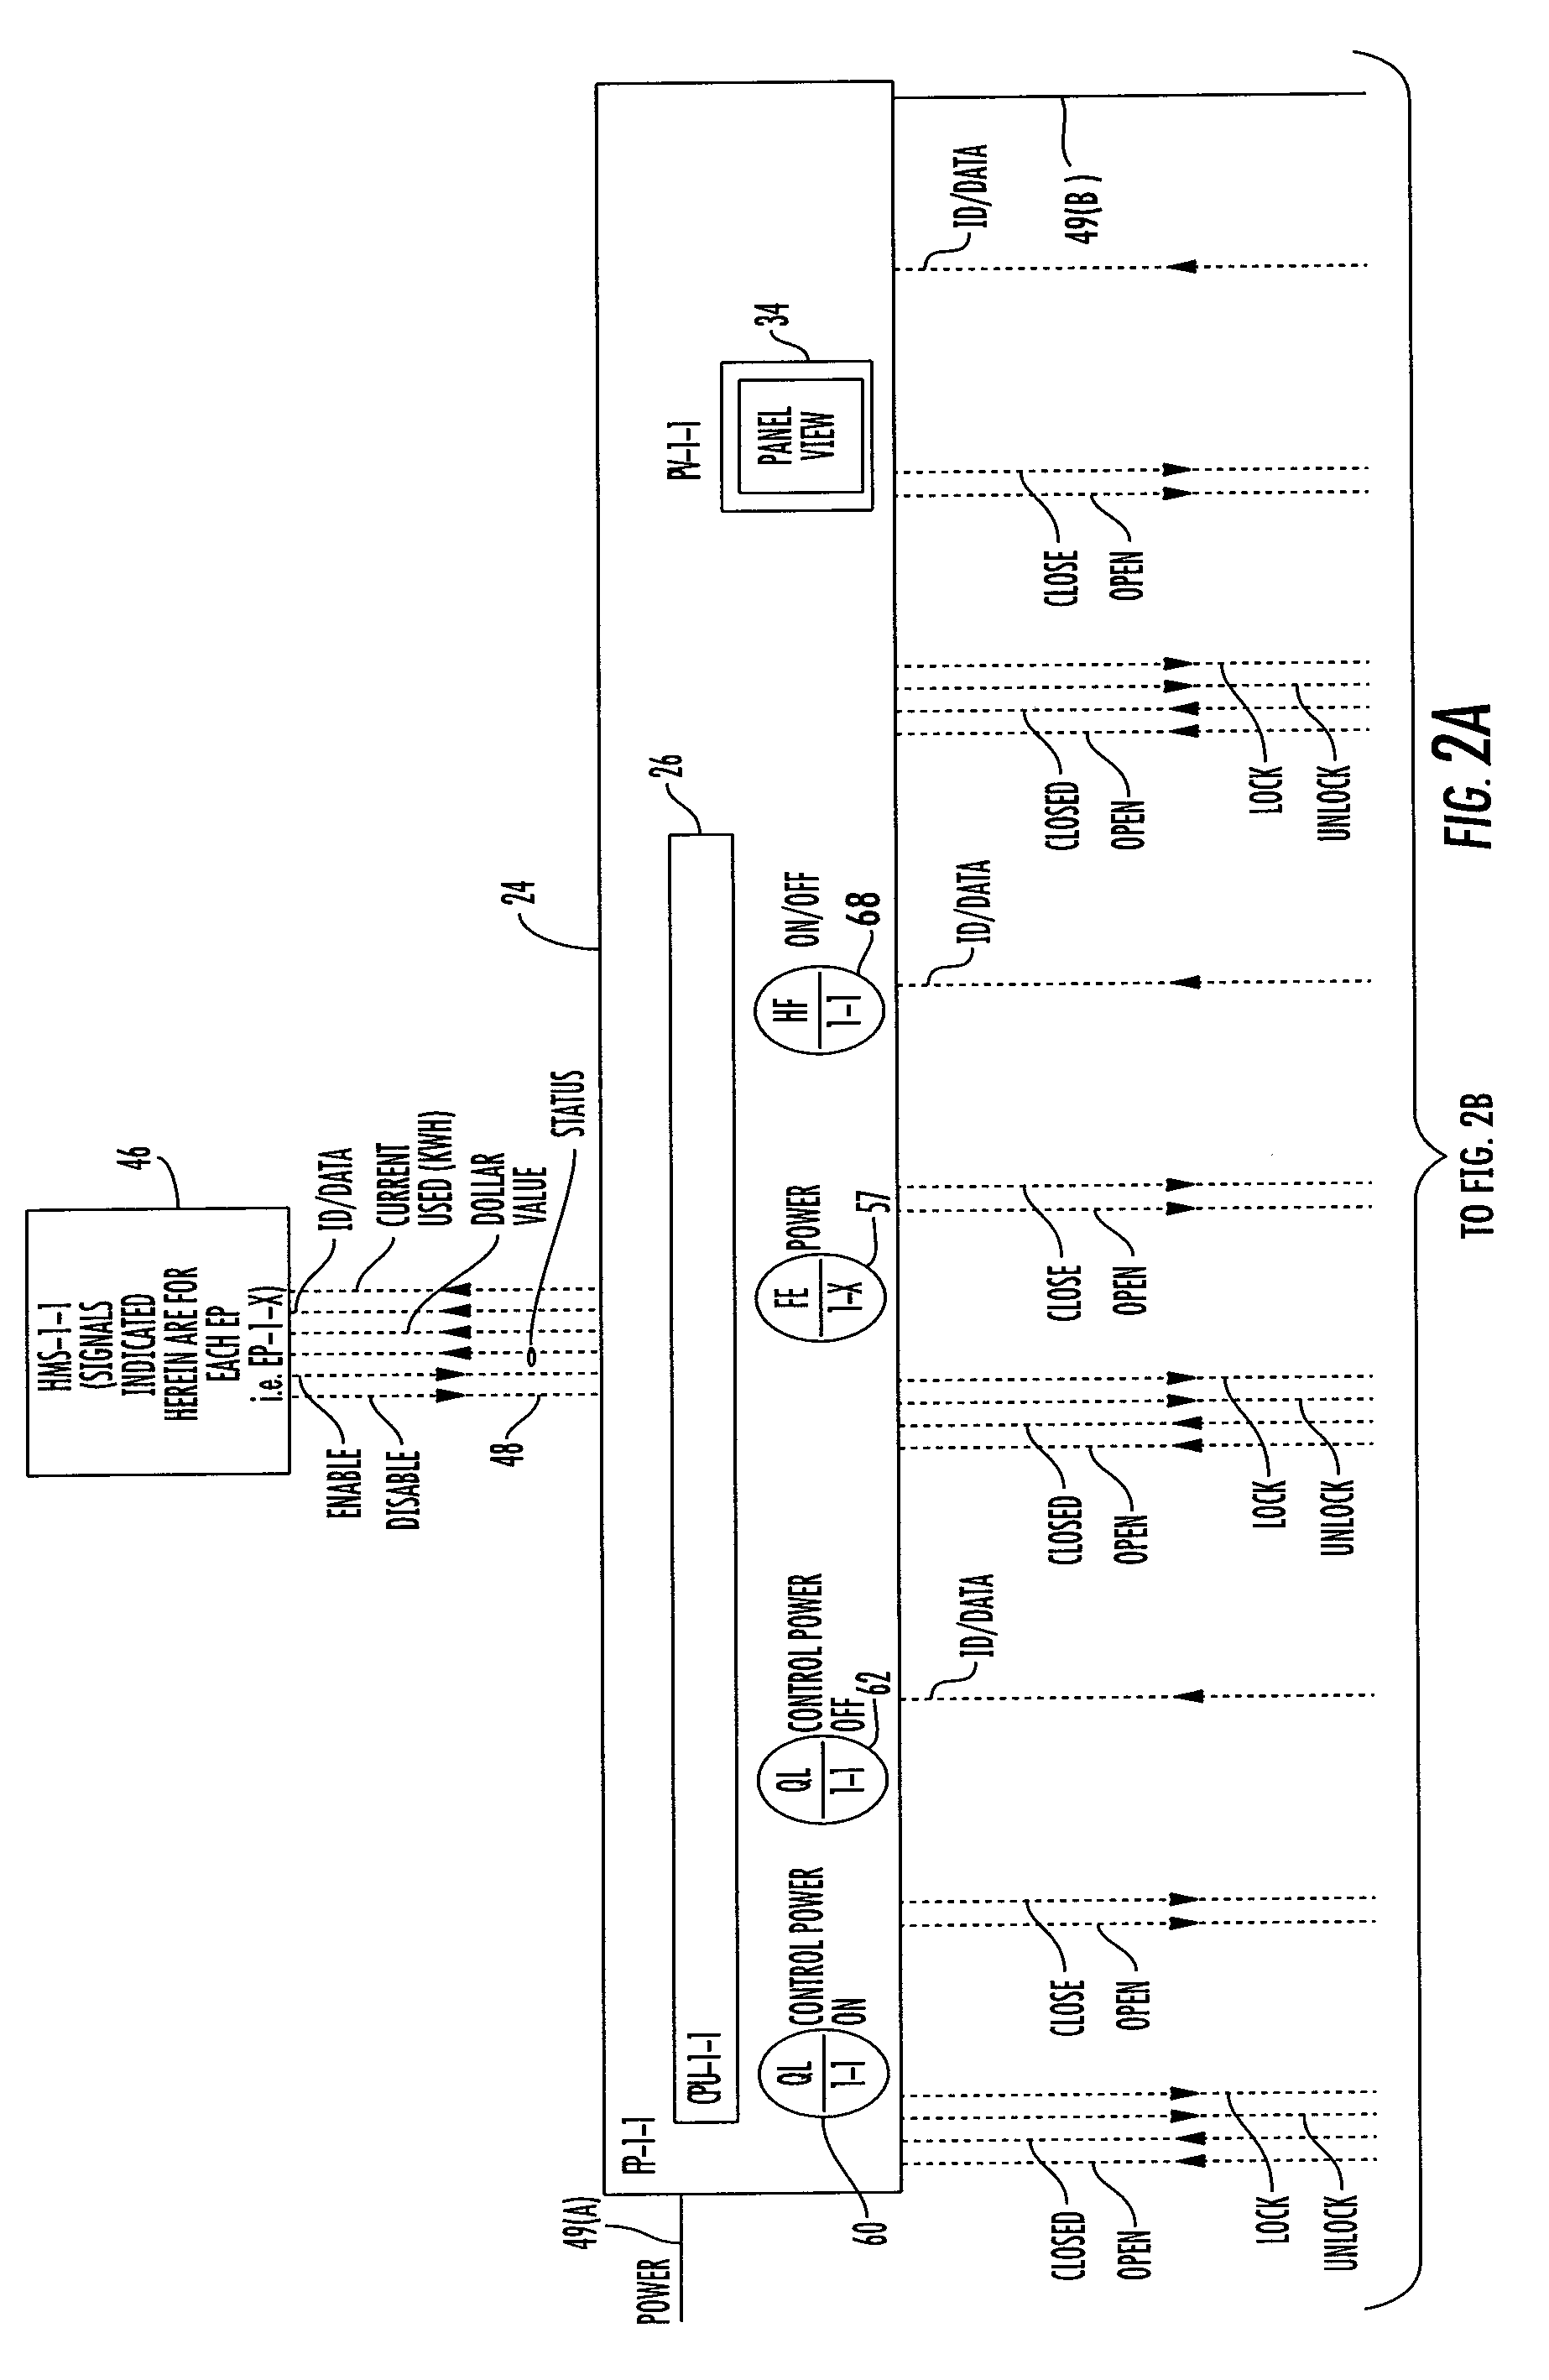 Metered Electrical Charging Station With Integrated Expense Tracking And Invoice Capabilities